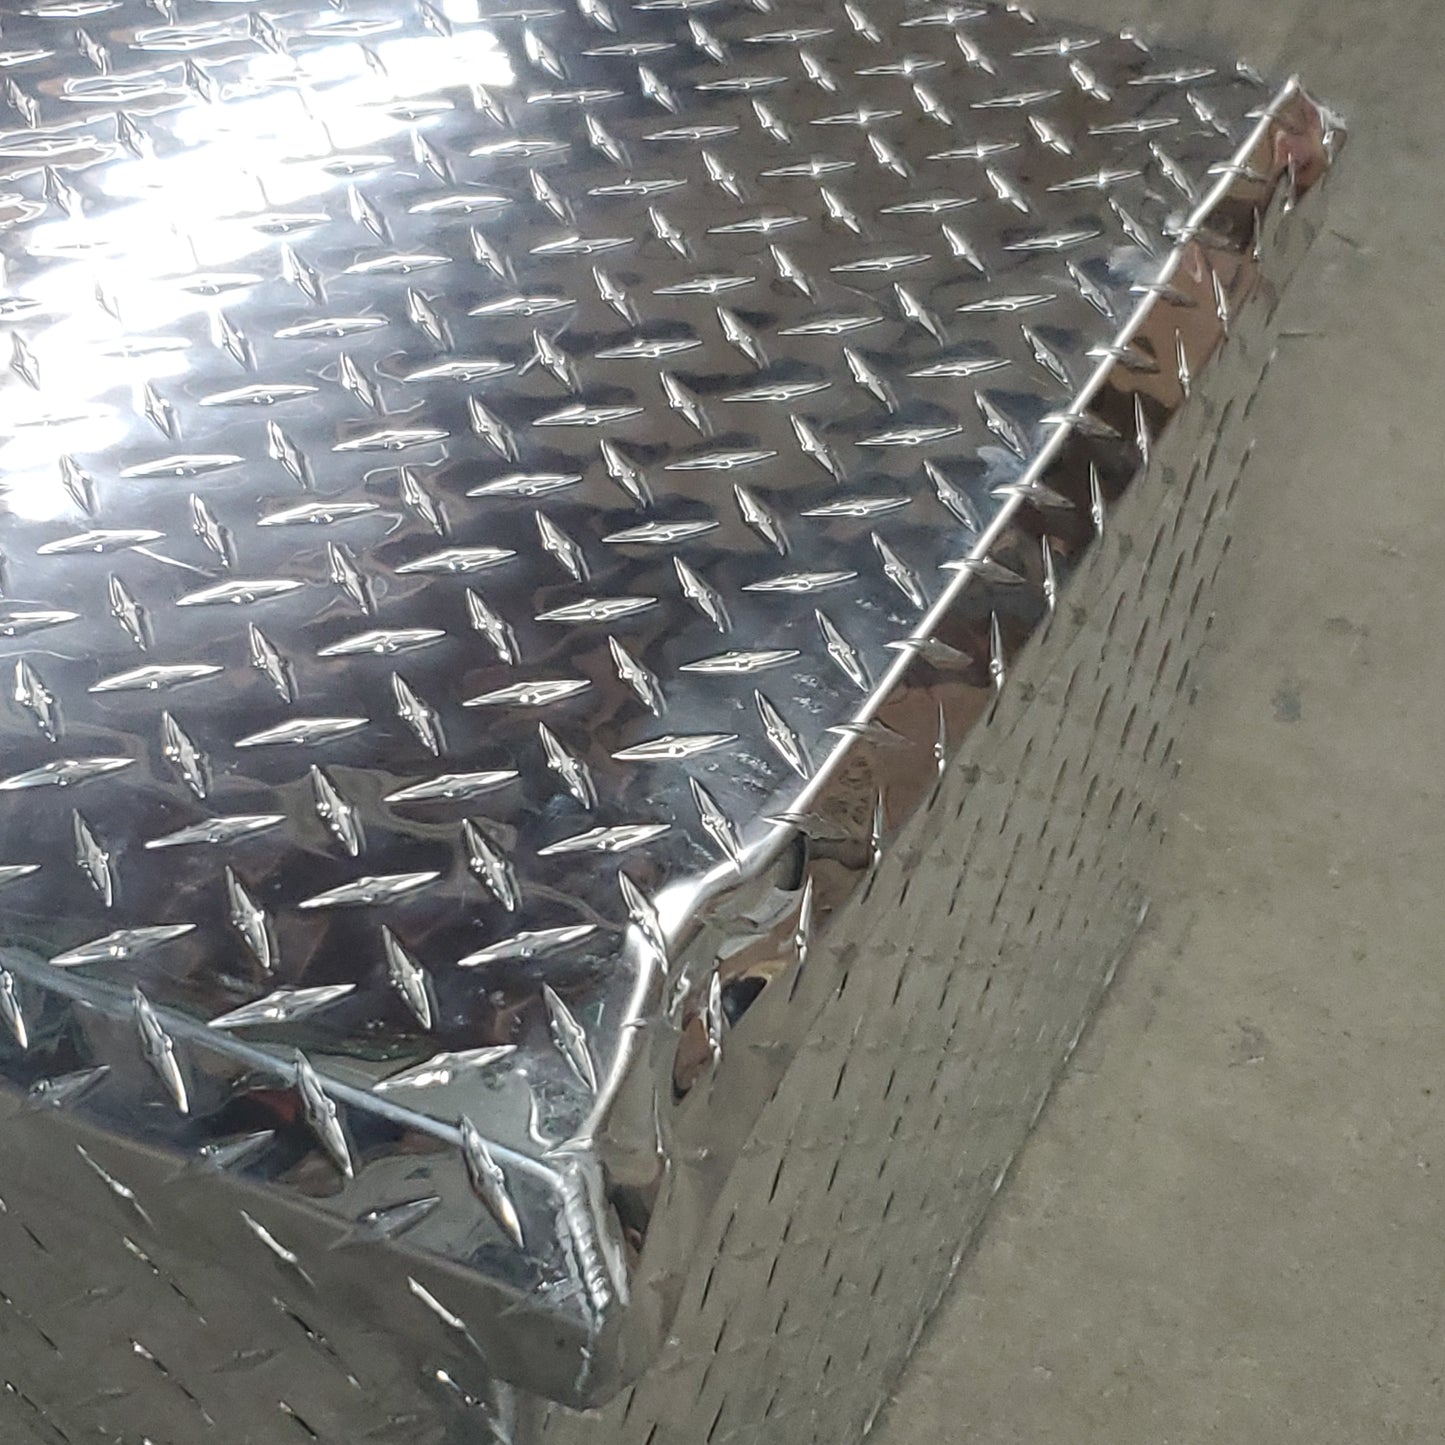 RDS MANUFACTURING Aluminum Truck Box RDS 70198 14"x20"x31" Damaged Top Right Corner AS-IS